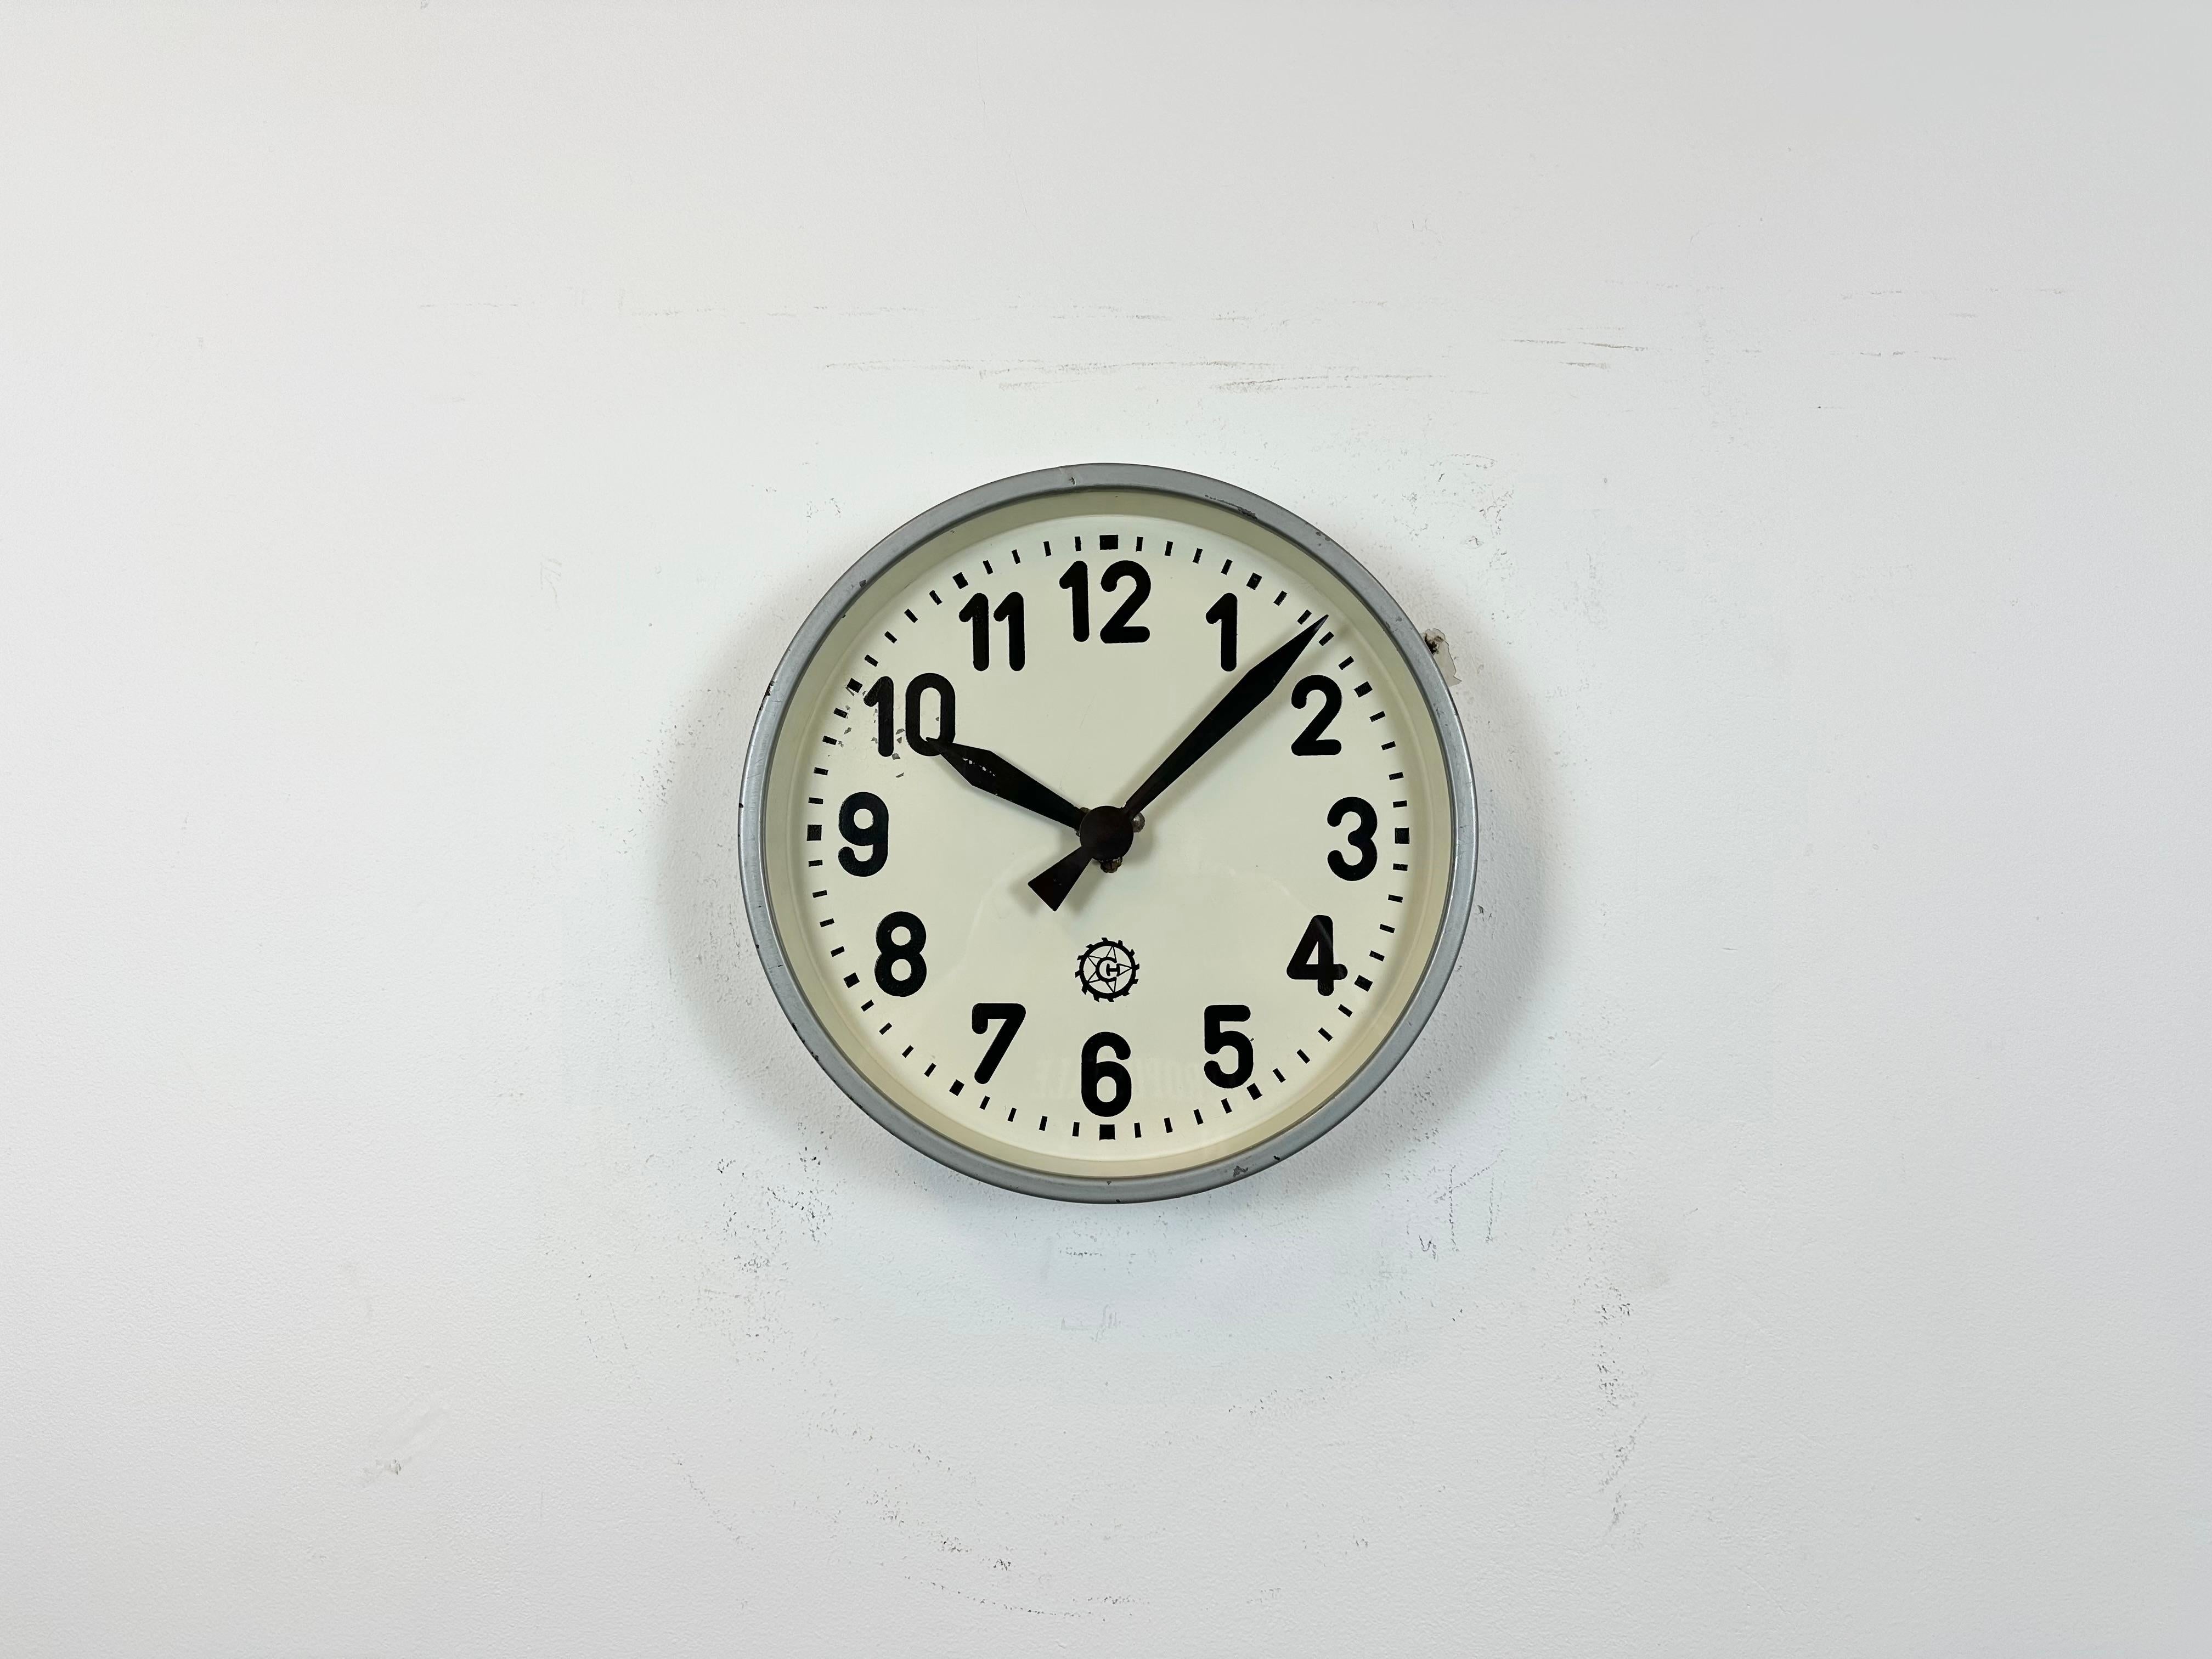 This factory wall clock wad produced by Chronotechna in former Czechoslovakia during the 1950s. It features a grey metal frame, iron dial, aluminum hands and clear glass cover. Former electrical slave clock has been converted into a battery-powered